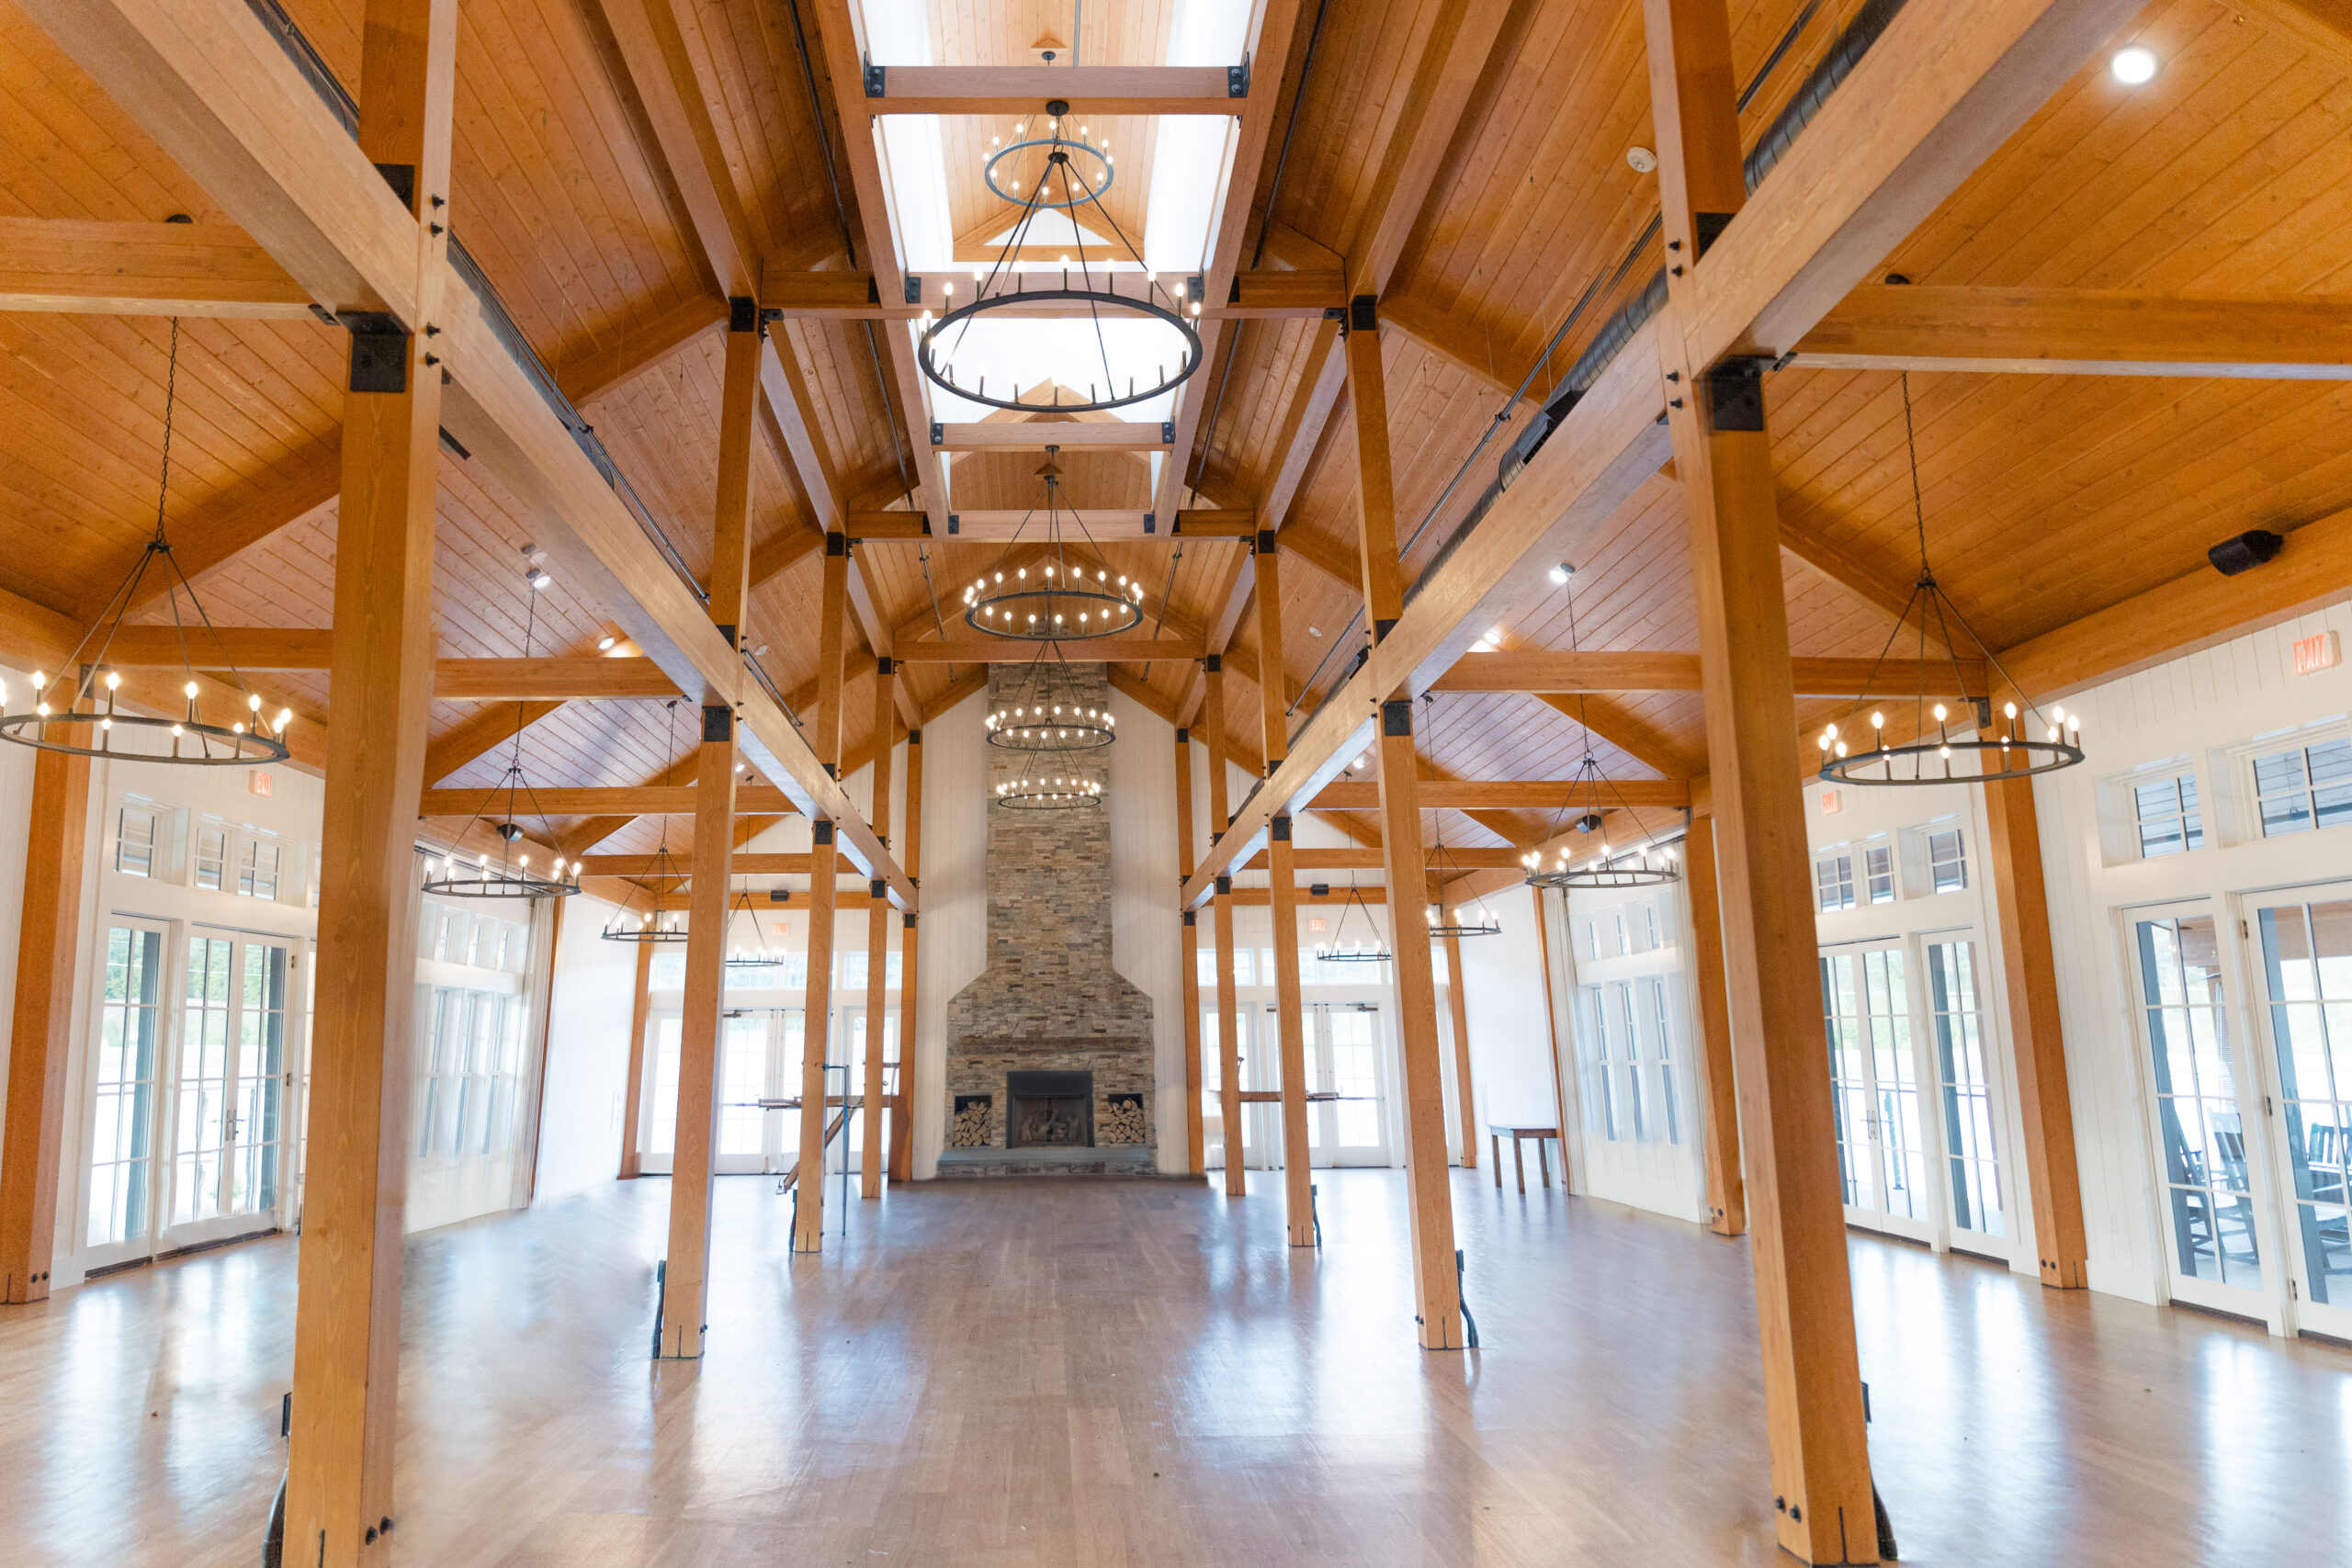 The Lake House at Owls Nest Resort offers an elegantly decorated rustic-chic space for wedding receptions.